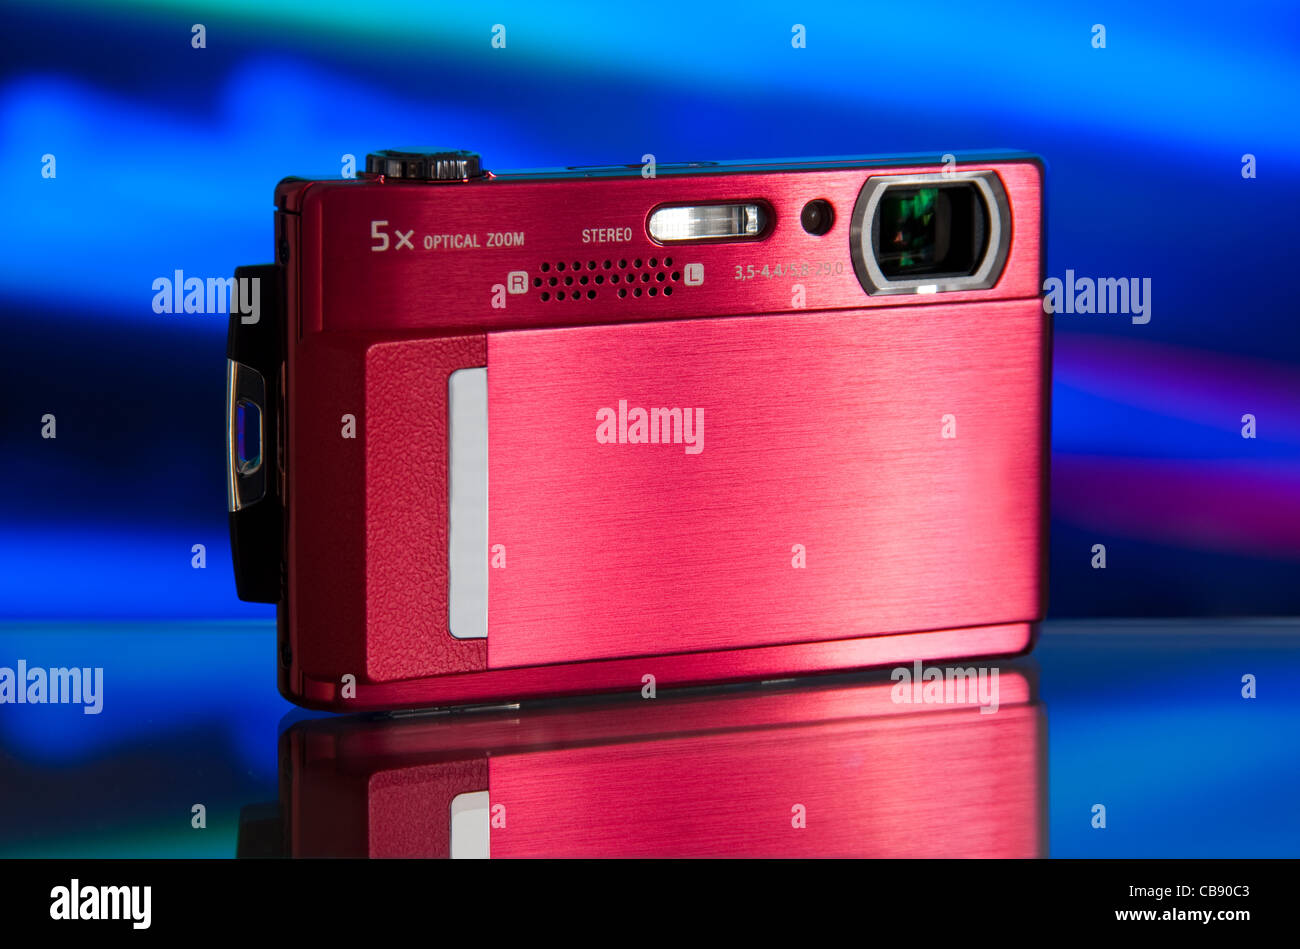 photo of the compact digital camera with beautiful background and glass reflection Stock Photo